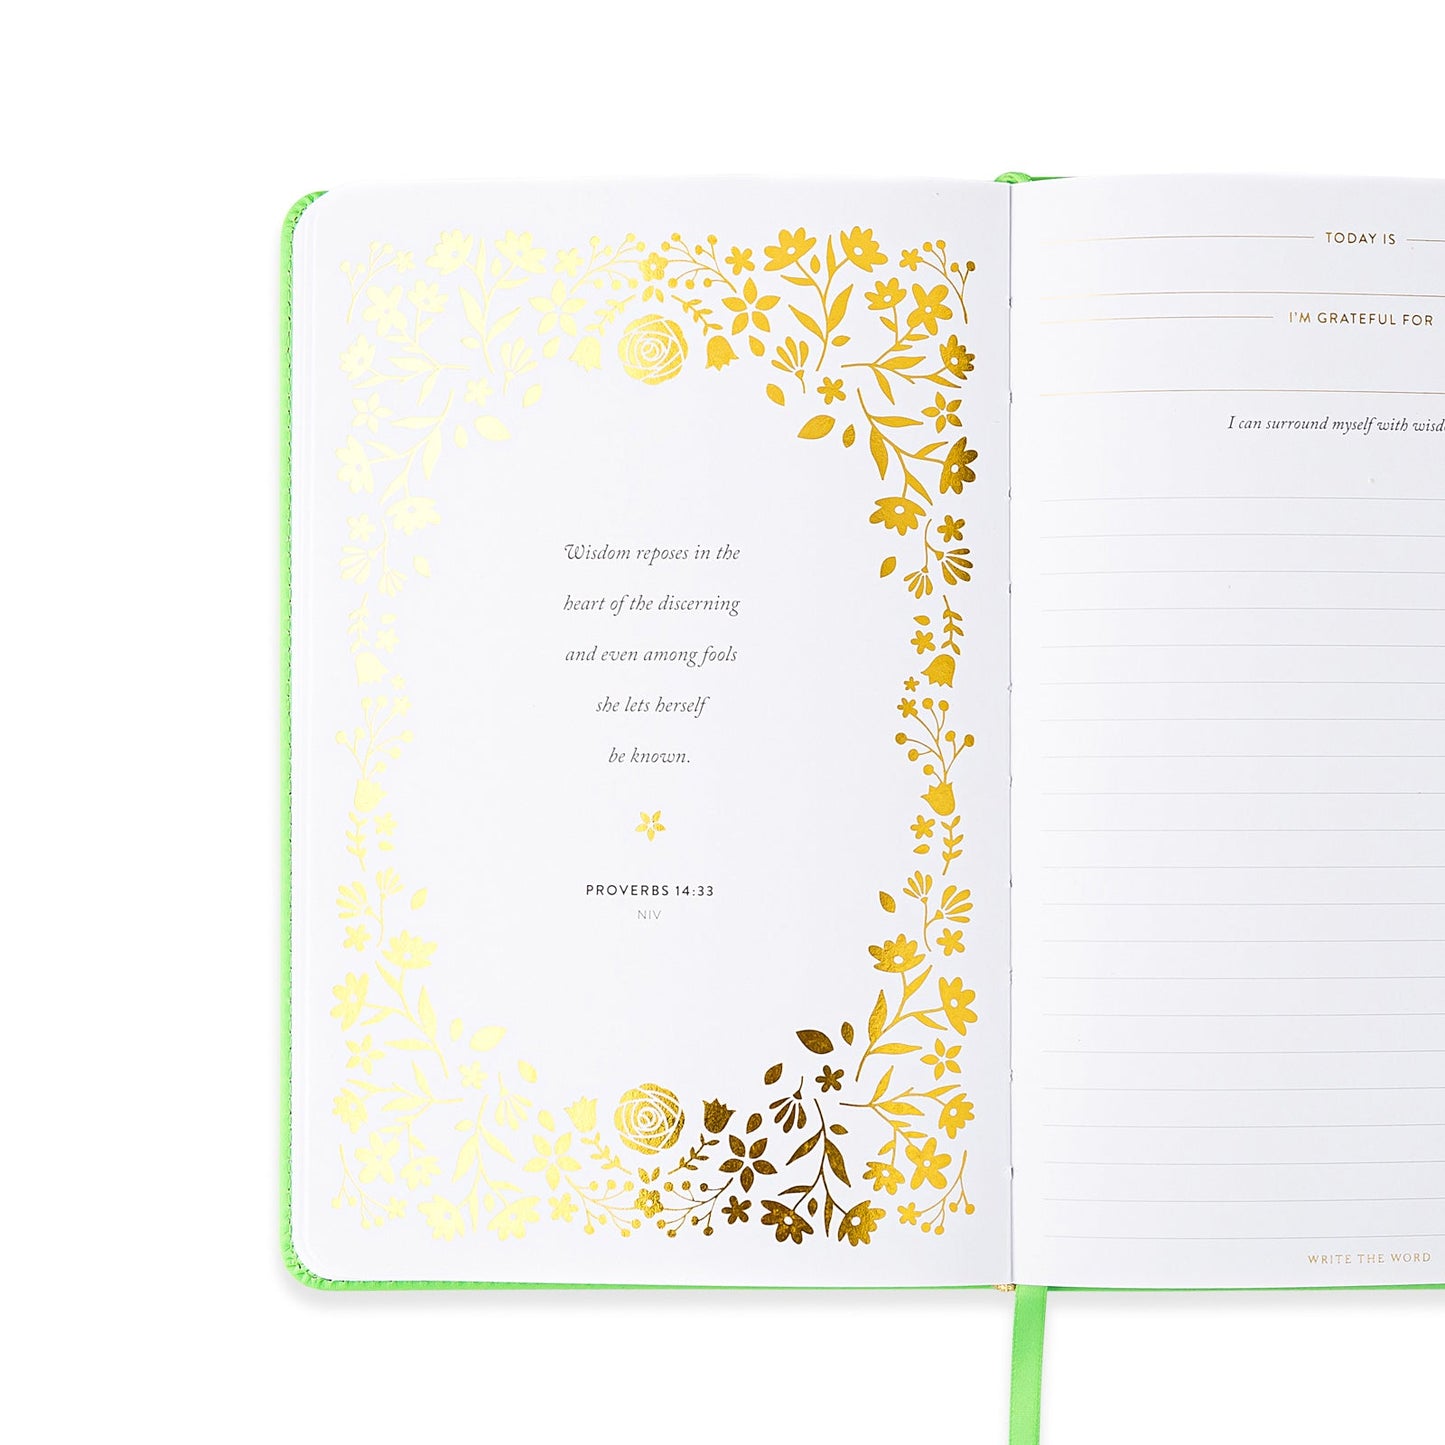 Write the Word - Life Goals - Cultivate What Matters - Confidence - Start Fresh - Know Who You Are in Him - Grow a Flourishing Faith Journal - Quiet Time - Word of the Day - Write Scripture - Verse of the Day 